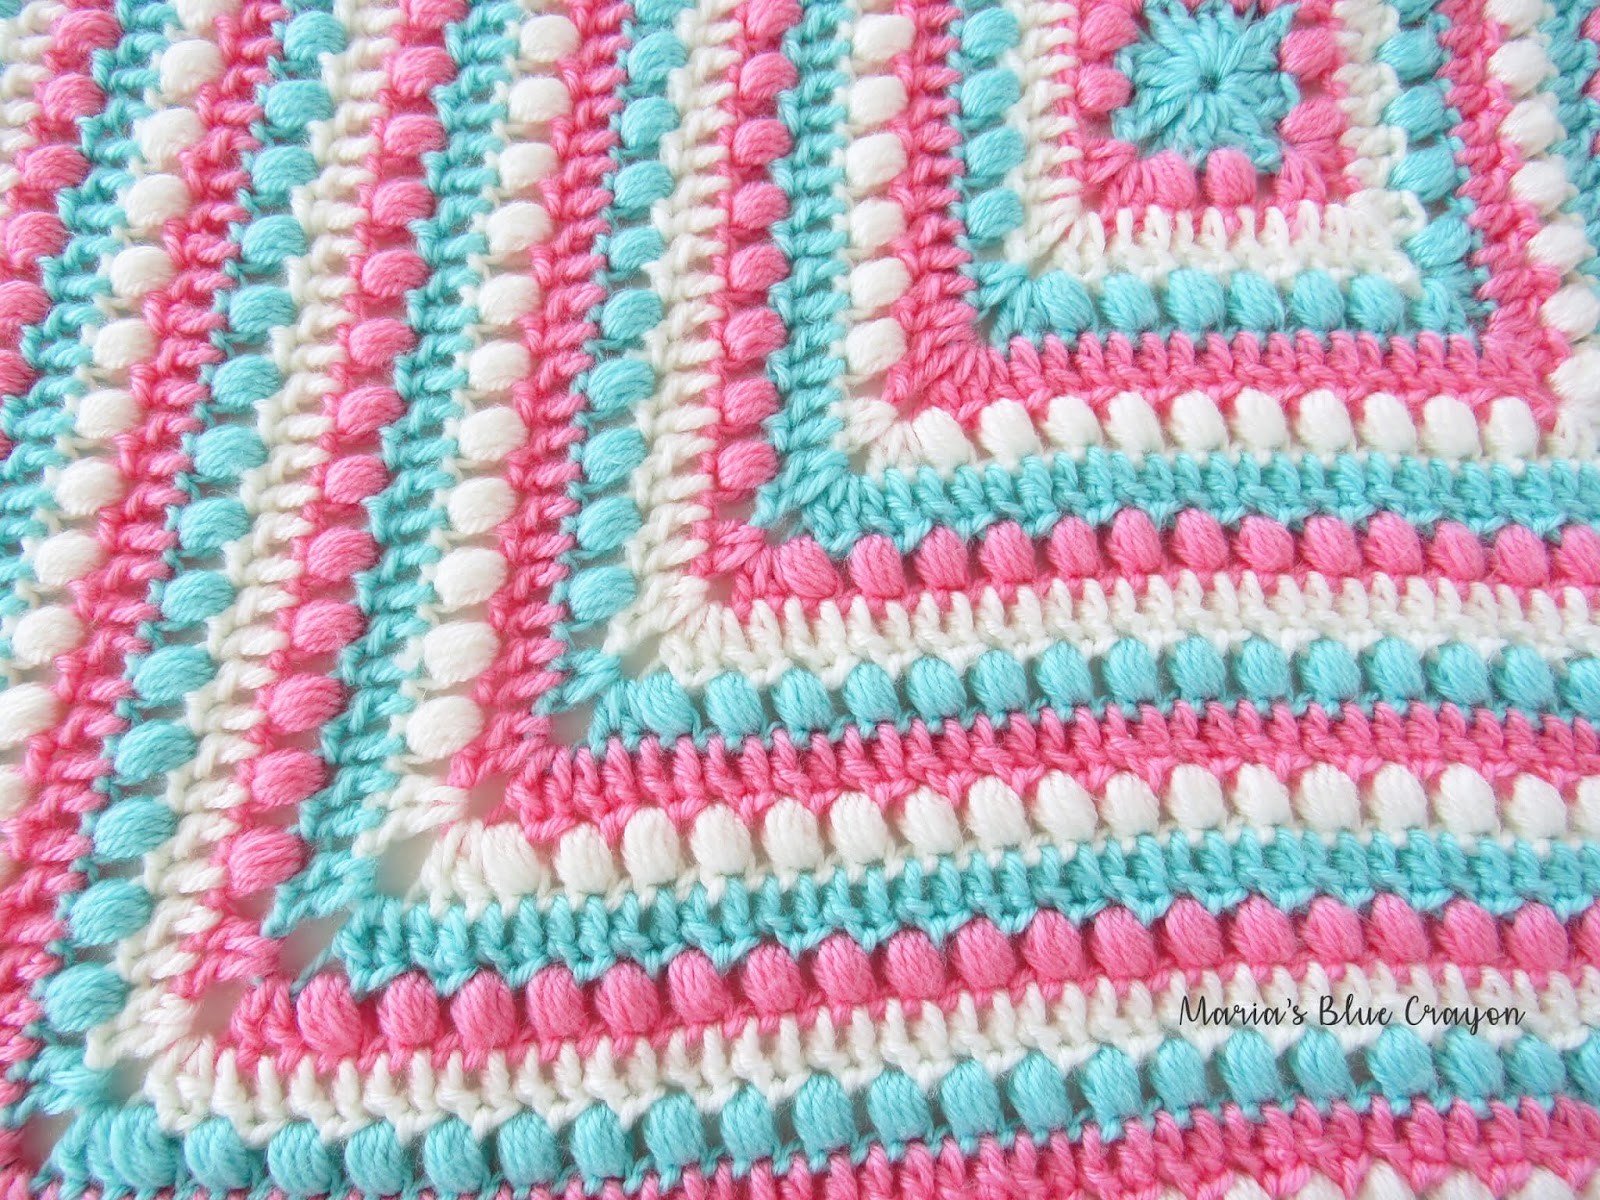 Free Easy Crochet Patterns Bobbles And Stripes Granny Square Blanket Free Easy Crochet Pattern